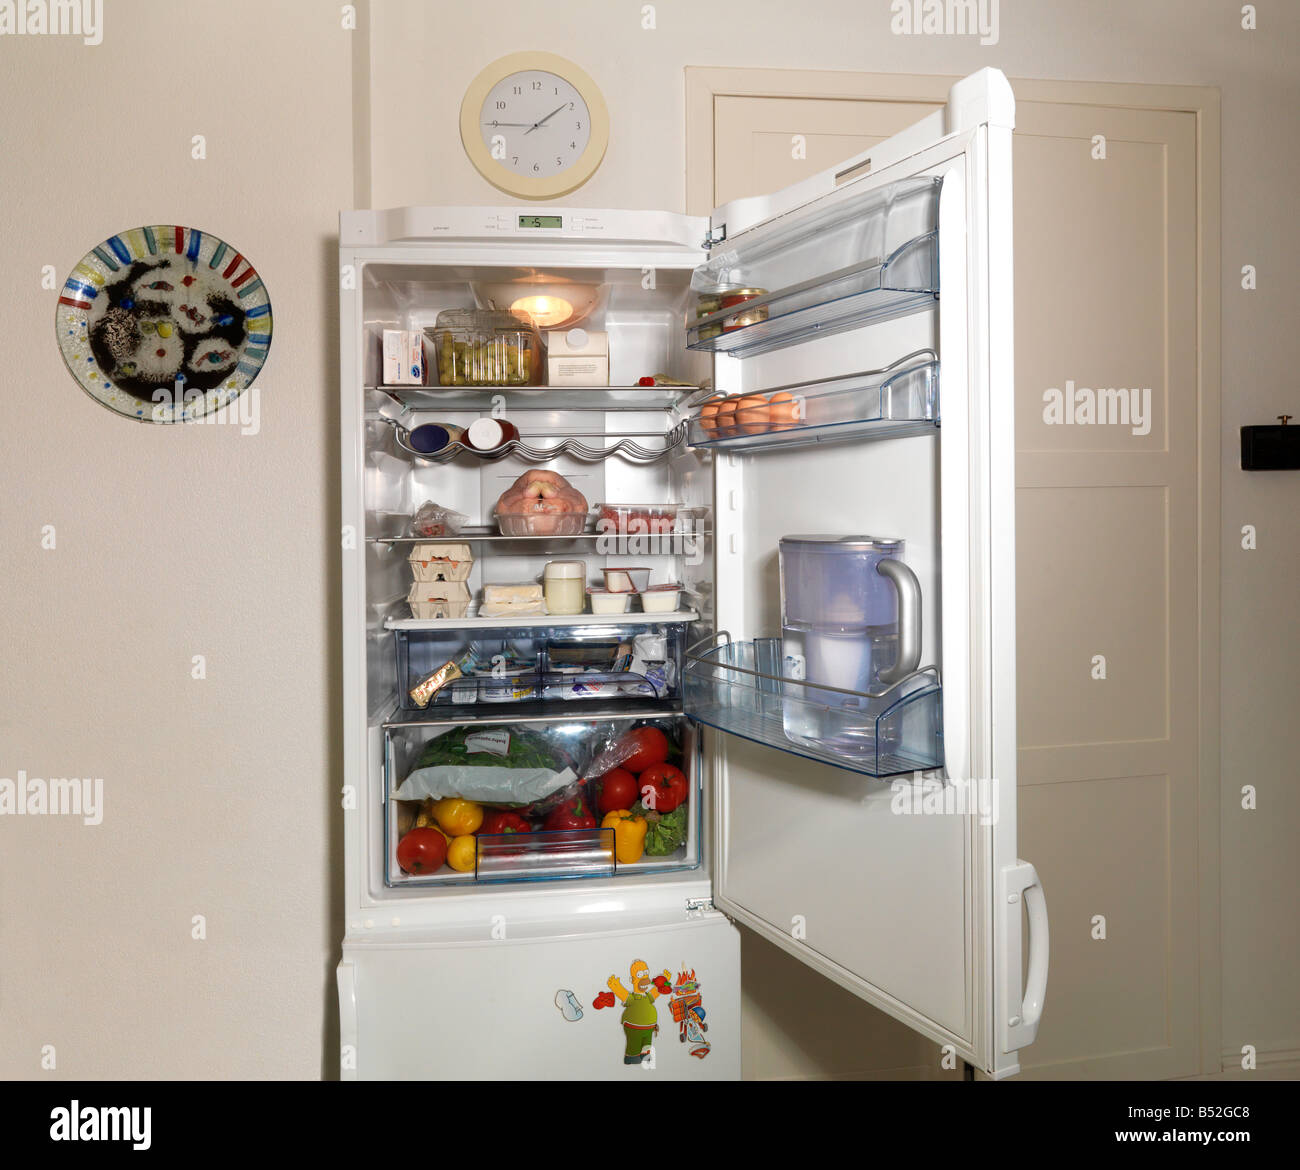 Interior of Fridge Showing Separate compartments for Produce Dairy and Meat Stock Photo